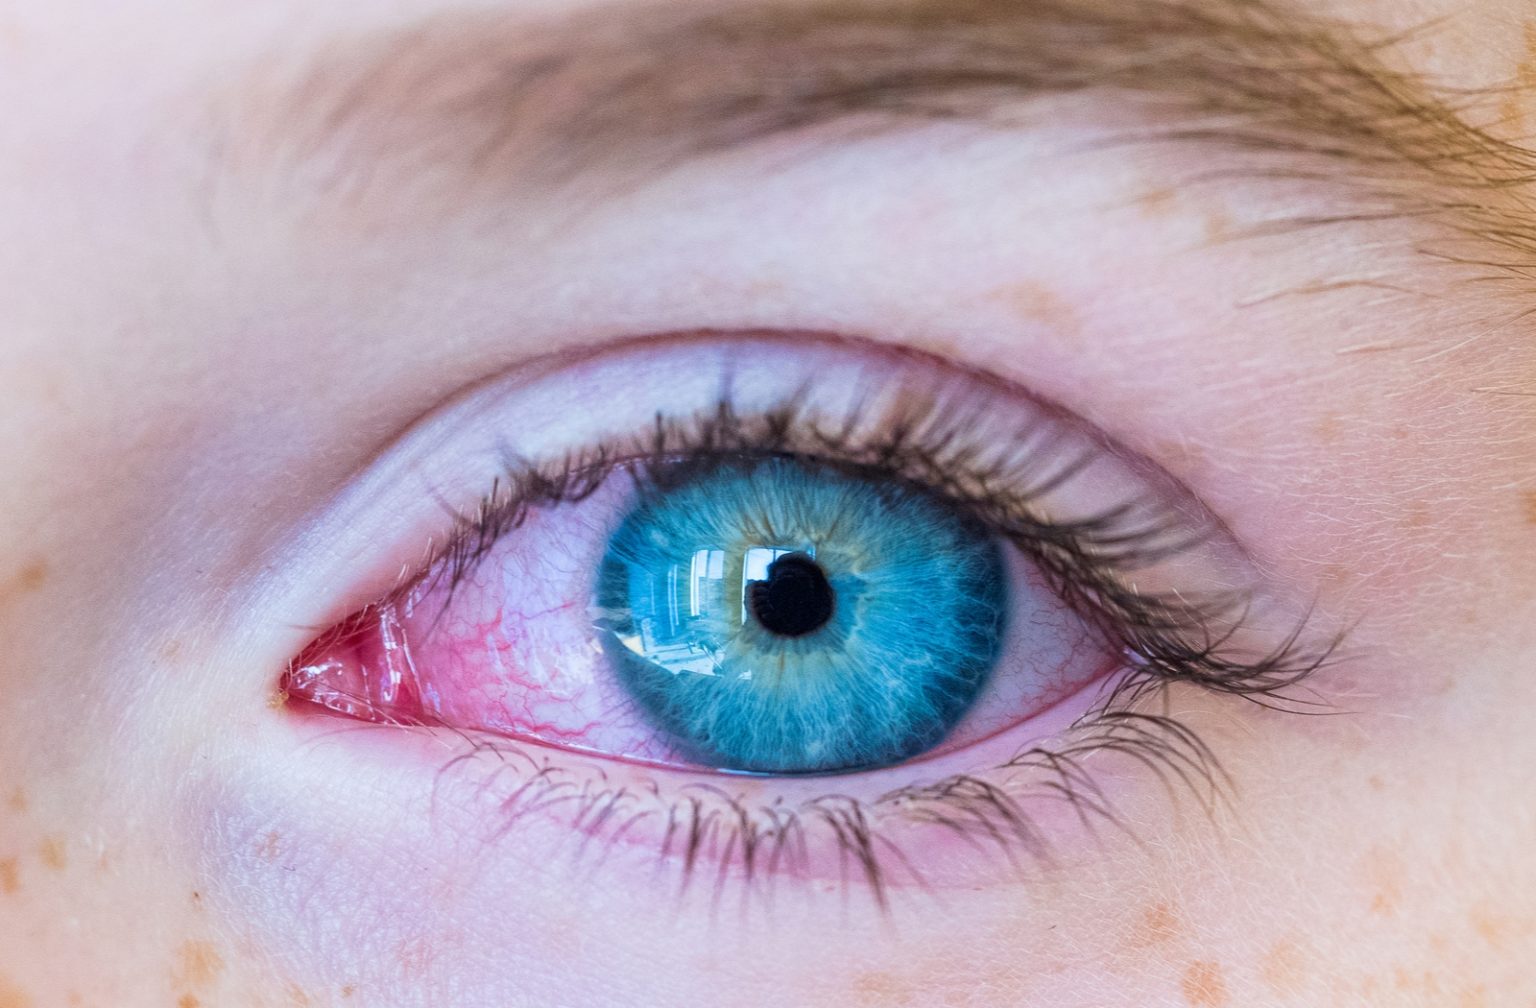 What Can Cause Red Eyes in a Child? - Calgary Family Eye Doctors